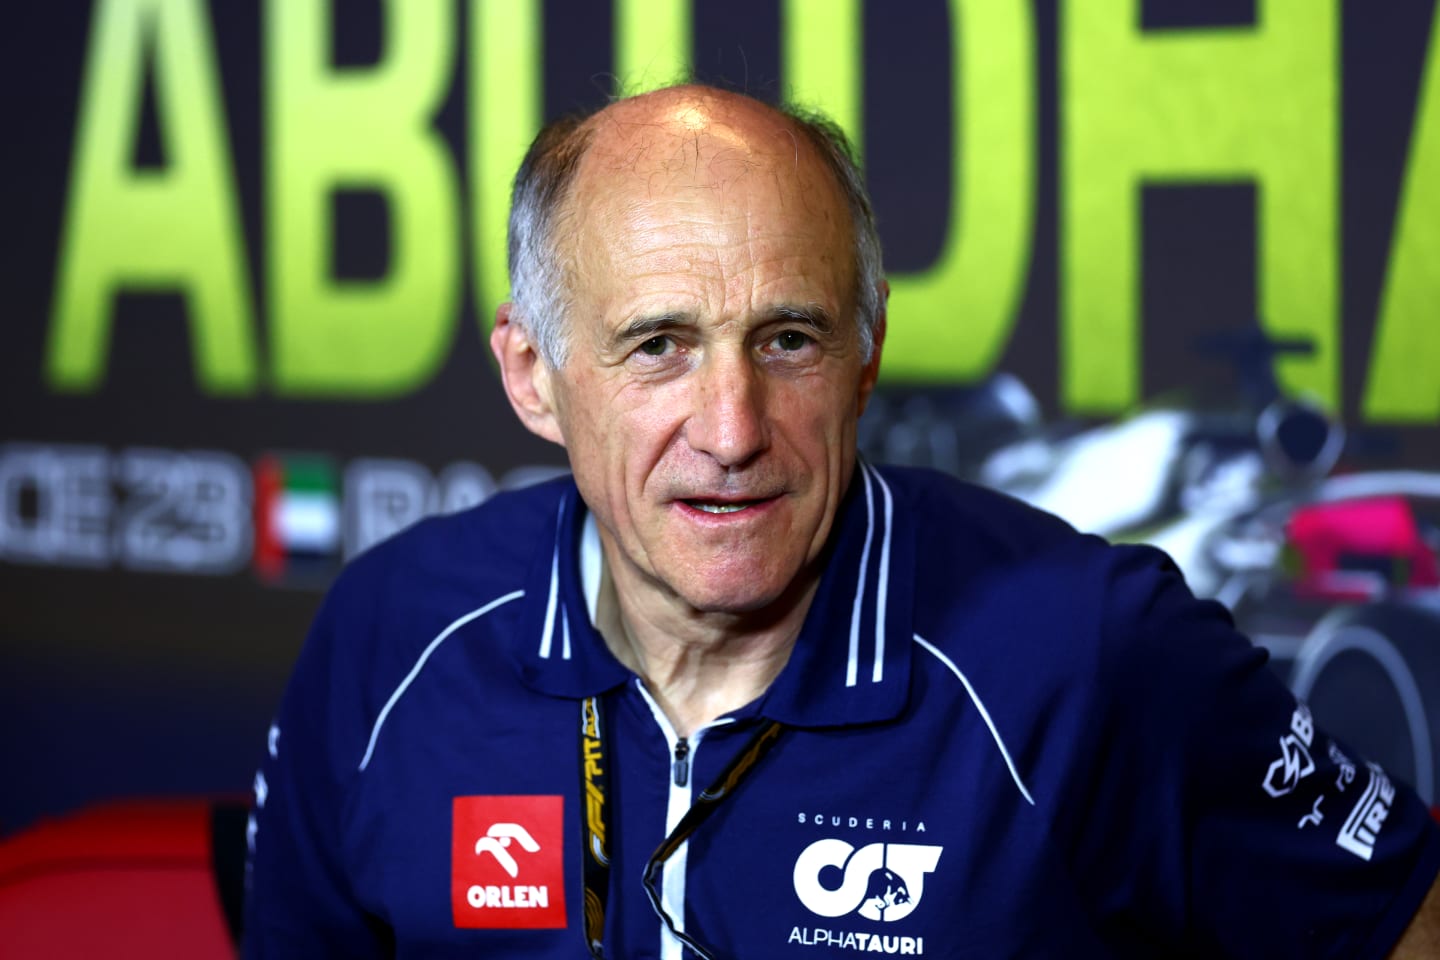 ABU DHABI, UNITED ARAB EMIRATES - NOVEMBER 24: Scuderia AlphaTauri Team Principal Franz Tost attends the Team Principals Press Conference during practice ahead of the F1 Grand Prix of Abu Dhabi at Yas Marina Circuit on November 24, 2023 in Abu Dhabi, United Arab Emirates. (Photo by Dan Istitene/Getty Images)